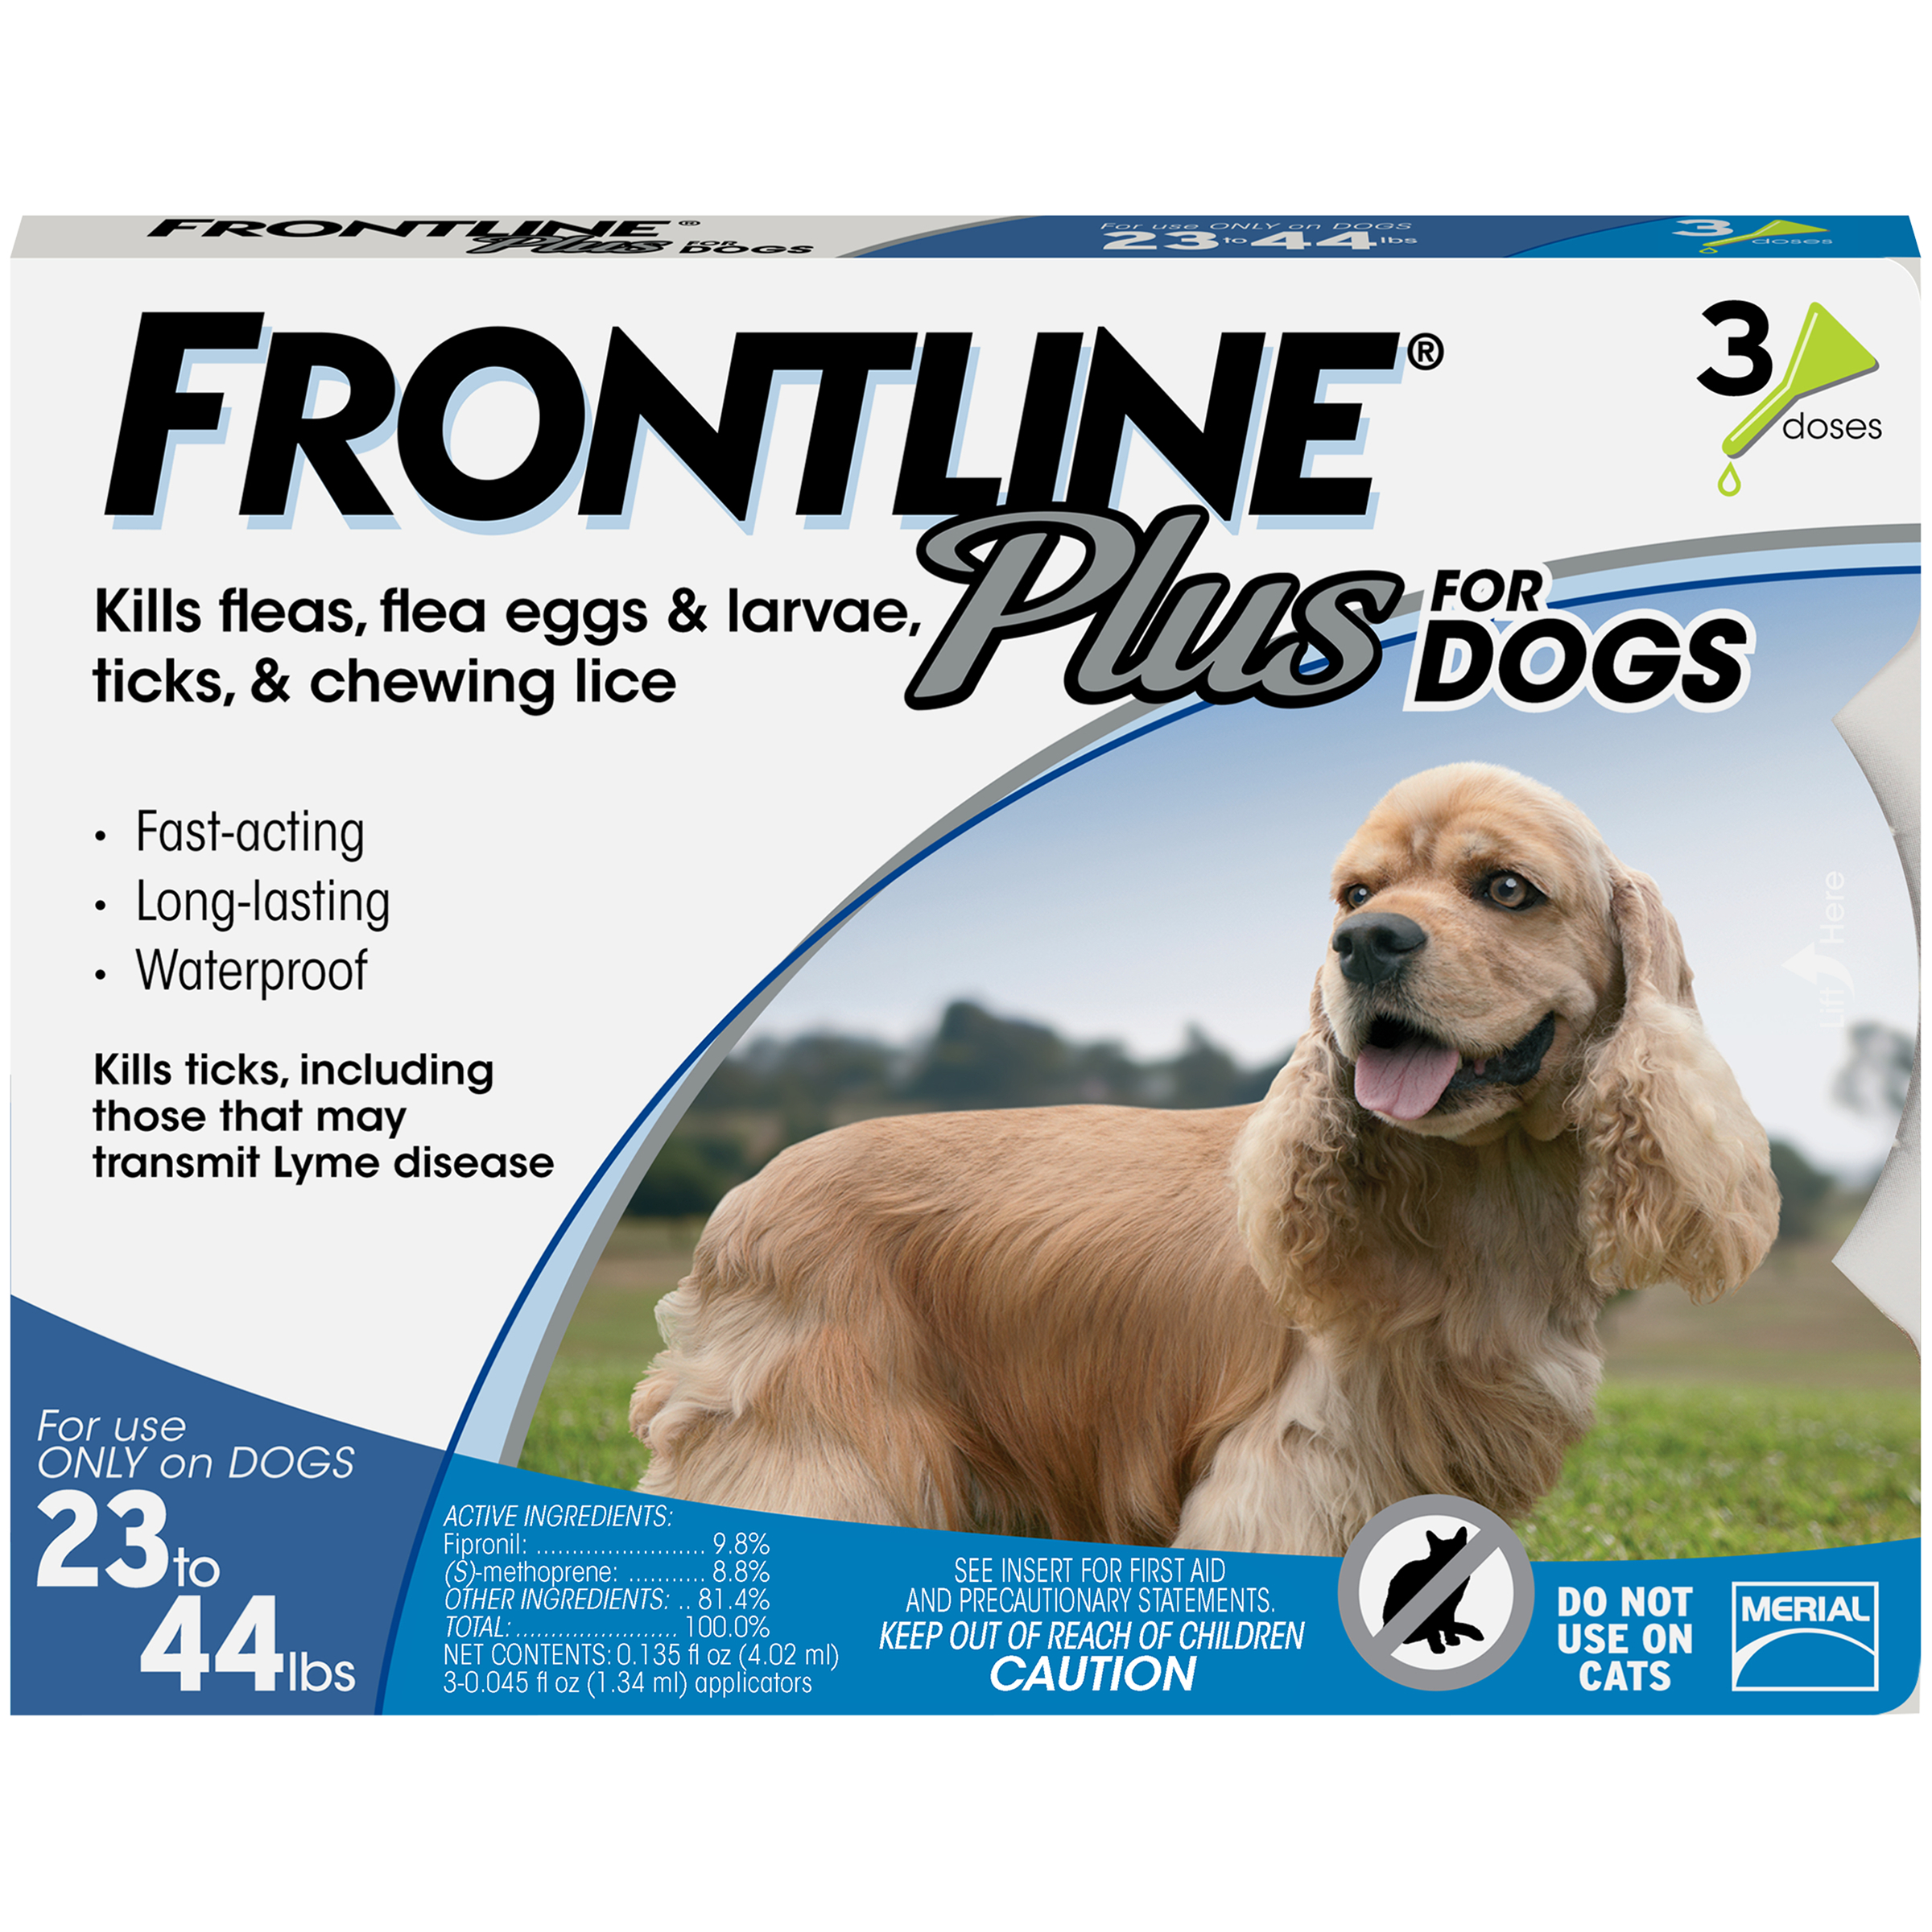 Frontline Plus for Dogs 23 to 44 lbs, 1 dose